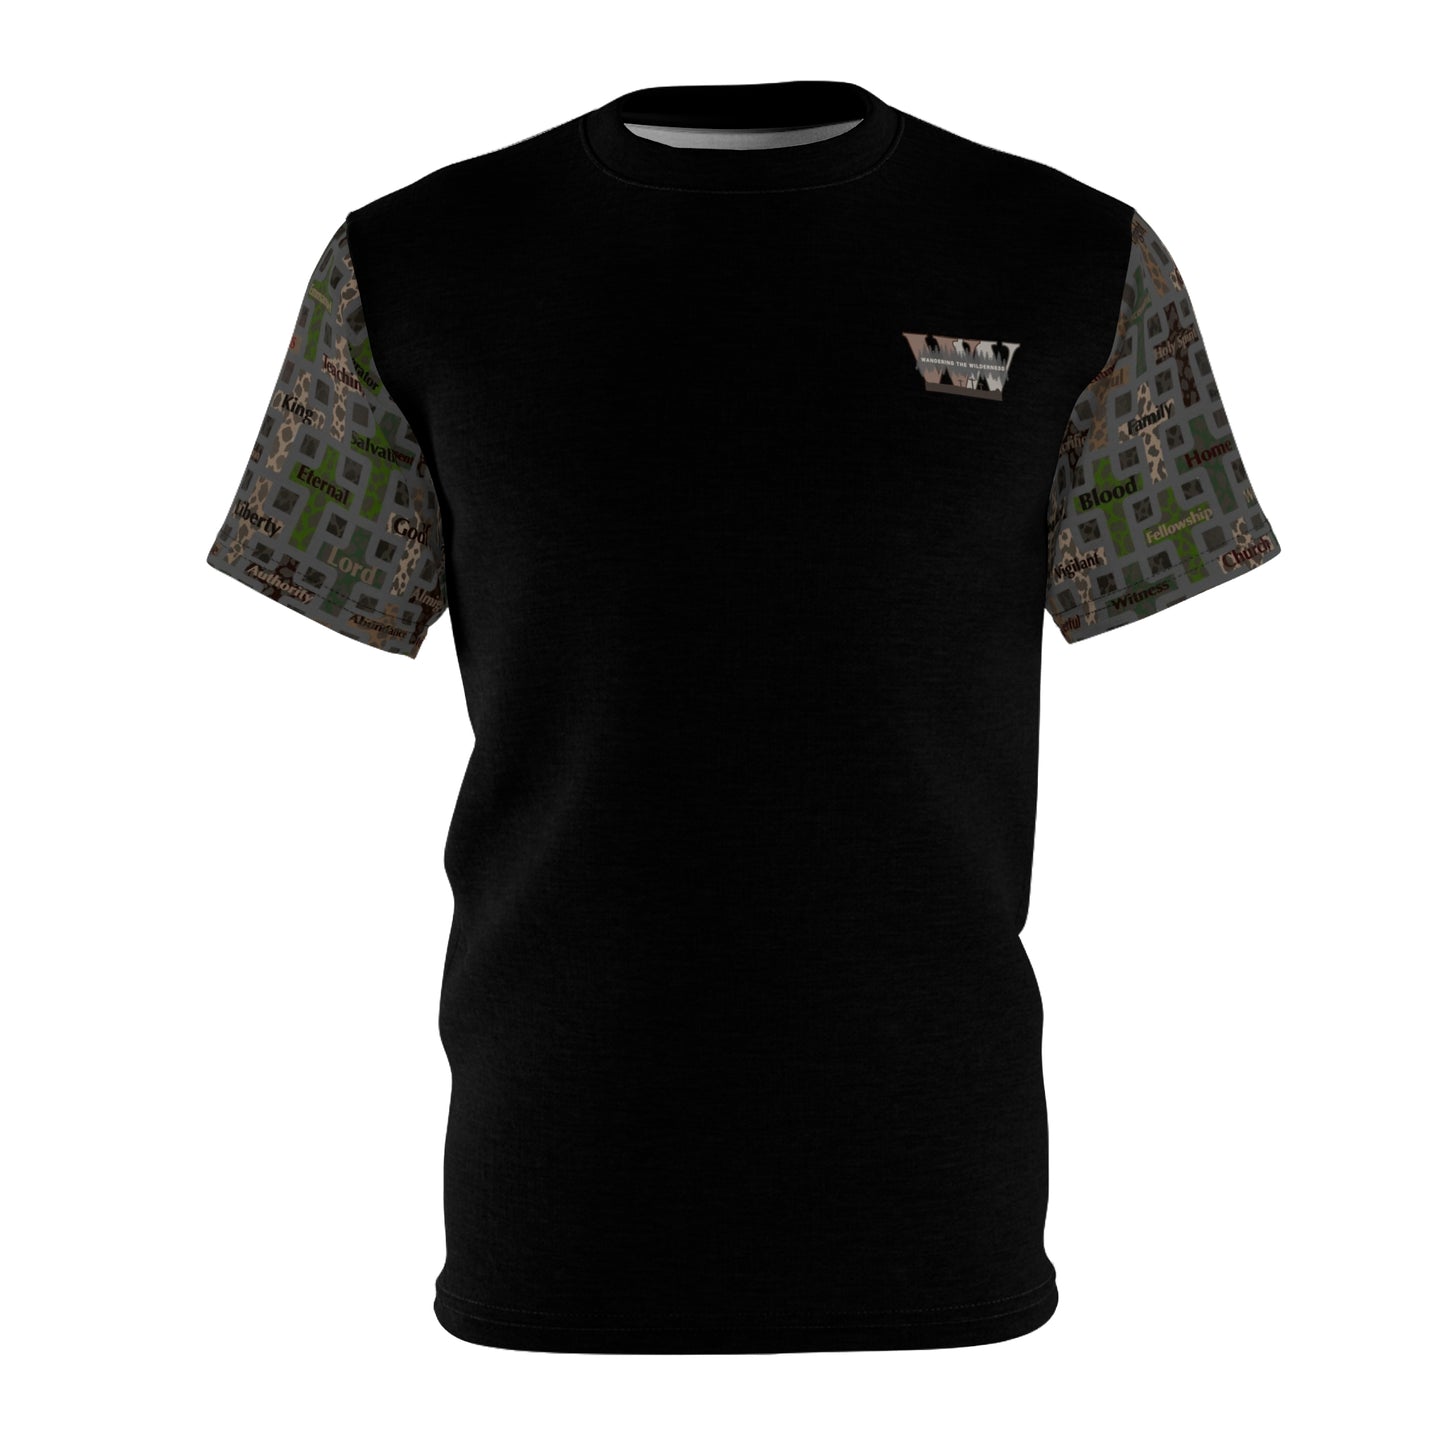 Wandering the Wilderness Power in the Blood short sleeve t-shirt.